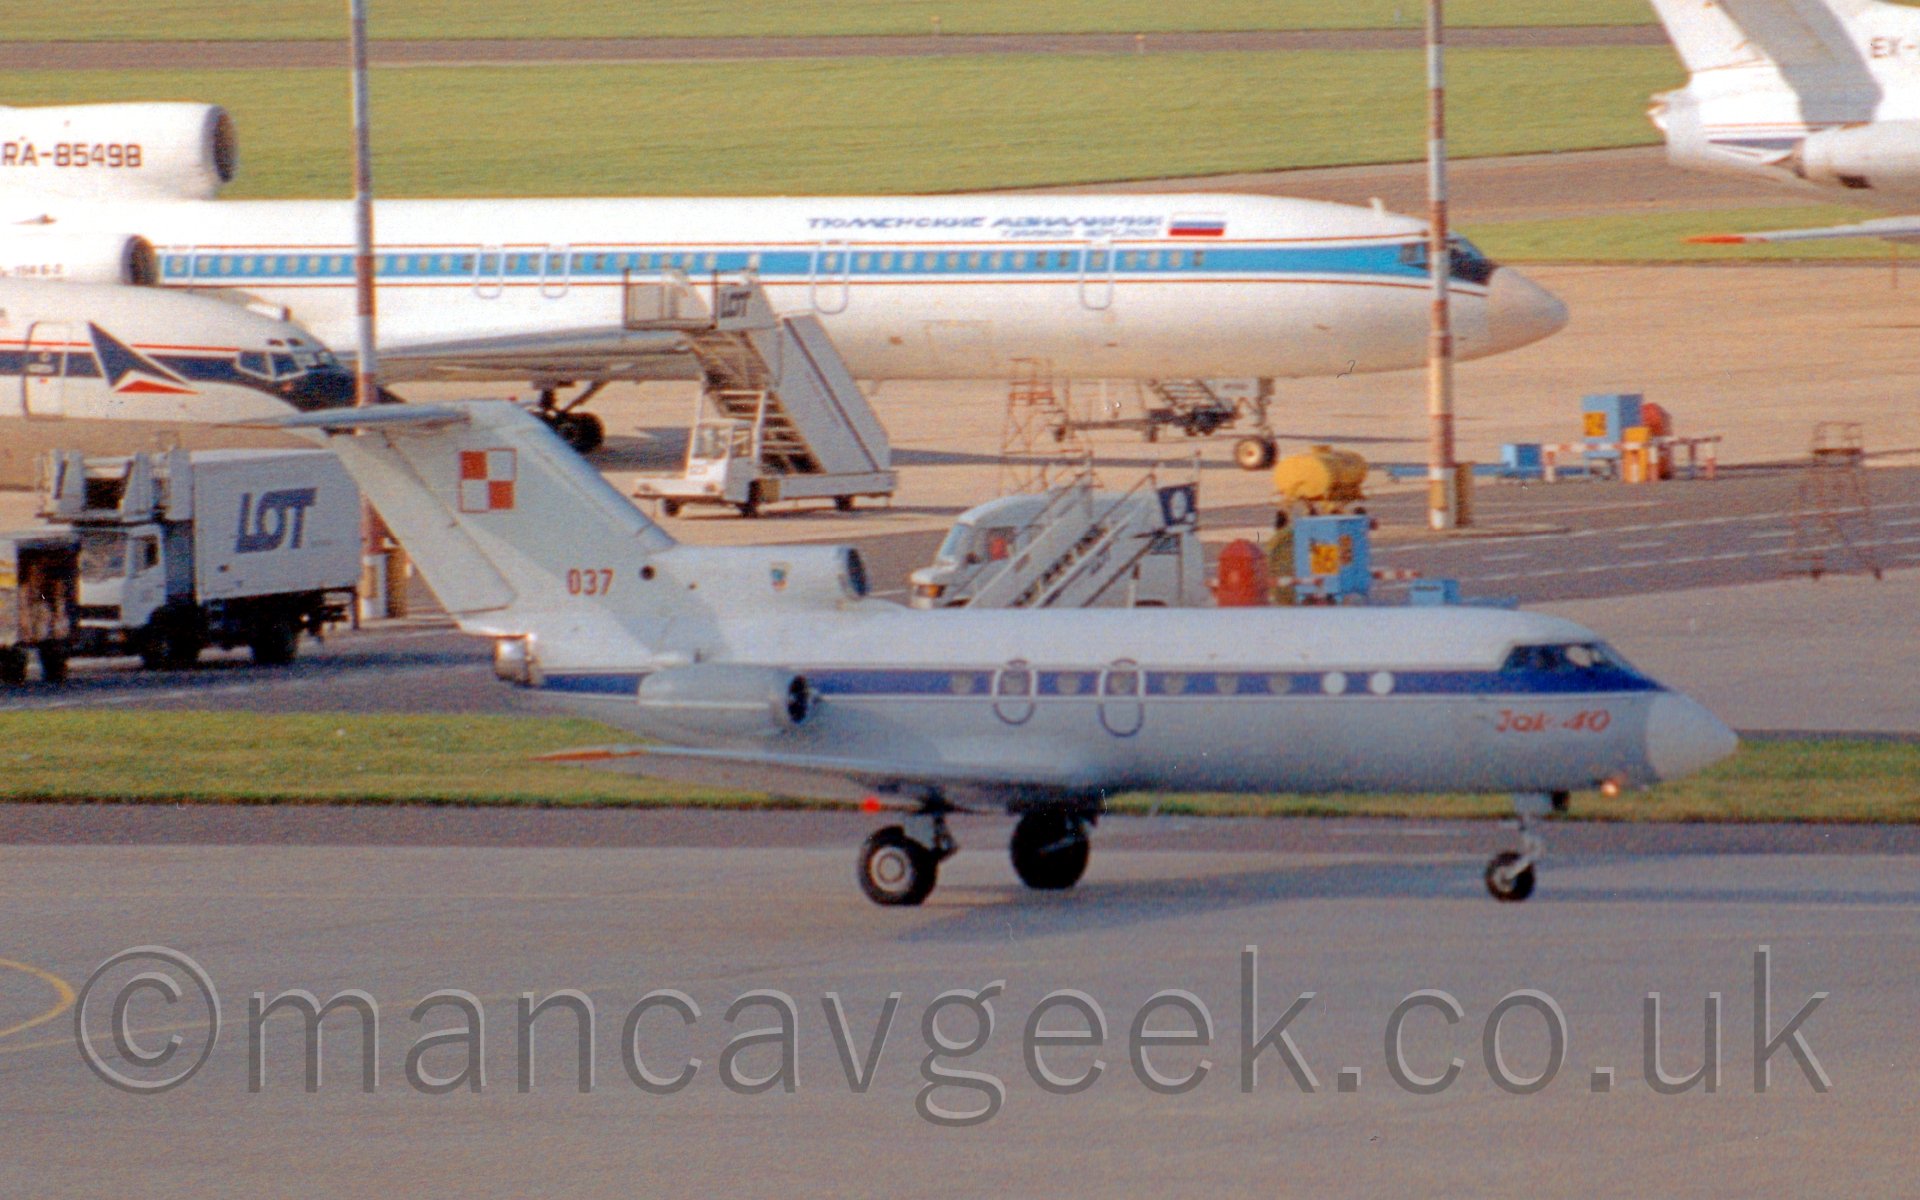 Side view of a small 3 engined jet airliner taxiing from left to right in front of some other planes. The planes body has a grey belly with white upper sections, a thick blue stripe covering the cabin windows seperates the 2 sections. The nose carries red "Yak-40" titles in a Cyrillic script, while the tail carries the red serial "037". There is a logo on the tail a red-outlined square with alternating red and white quarters.